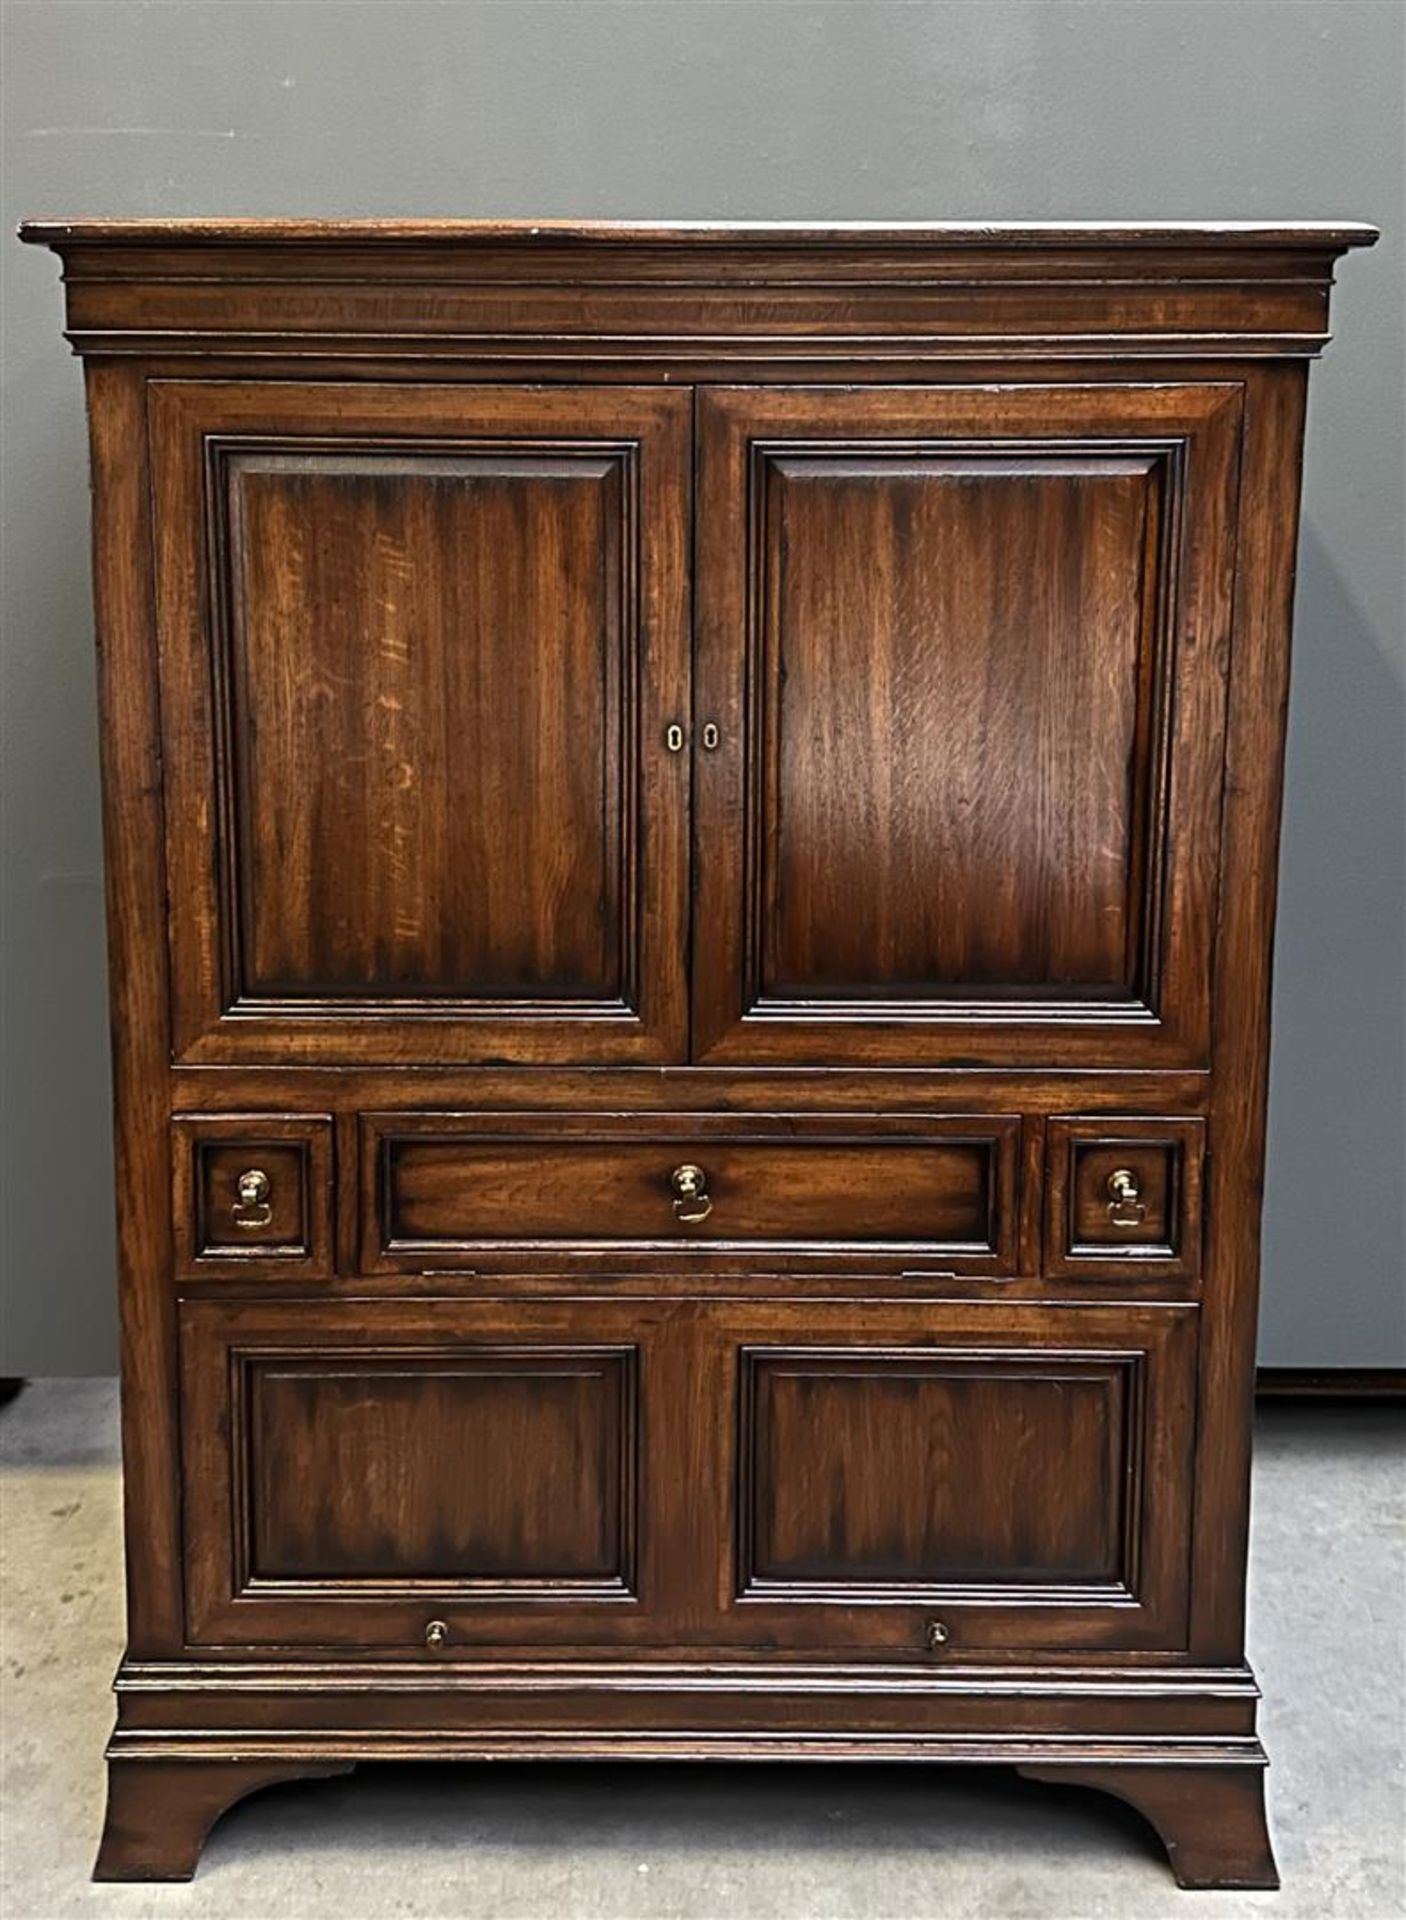 A chestnut wood china cabinet, after an older example. In very good condition.